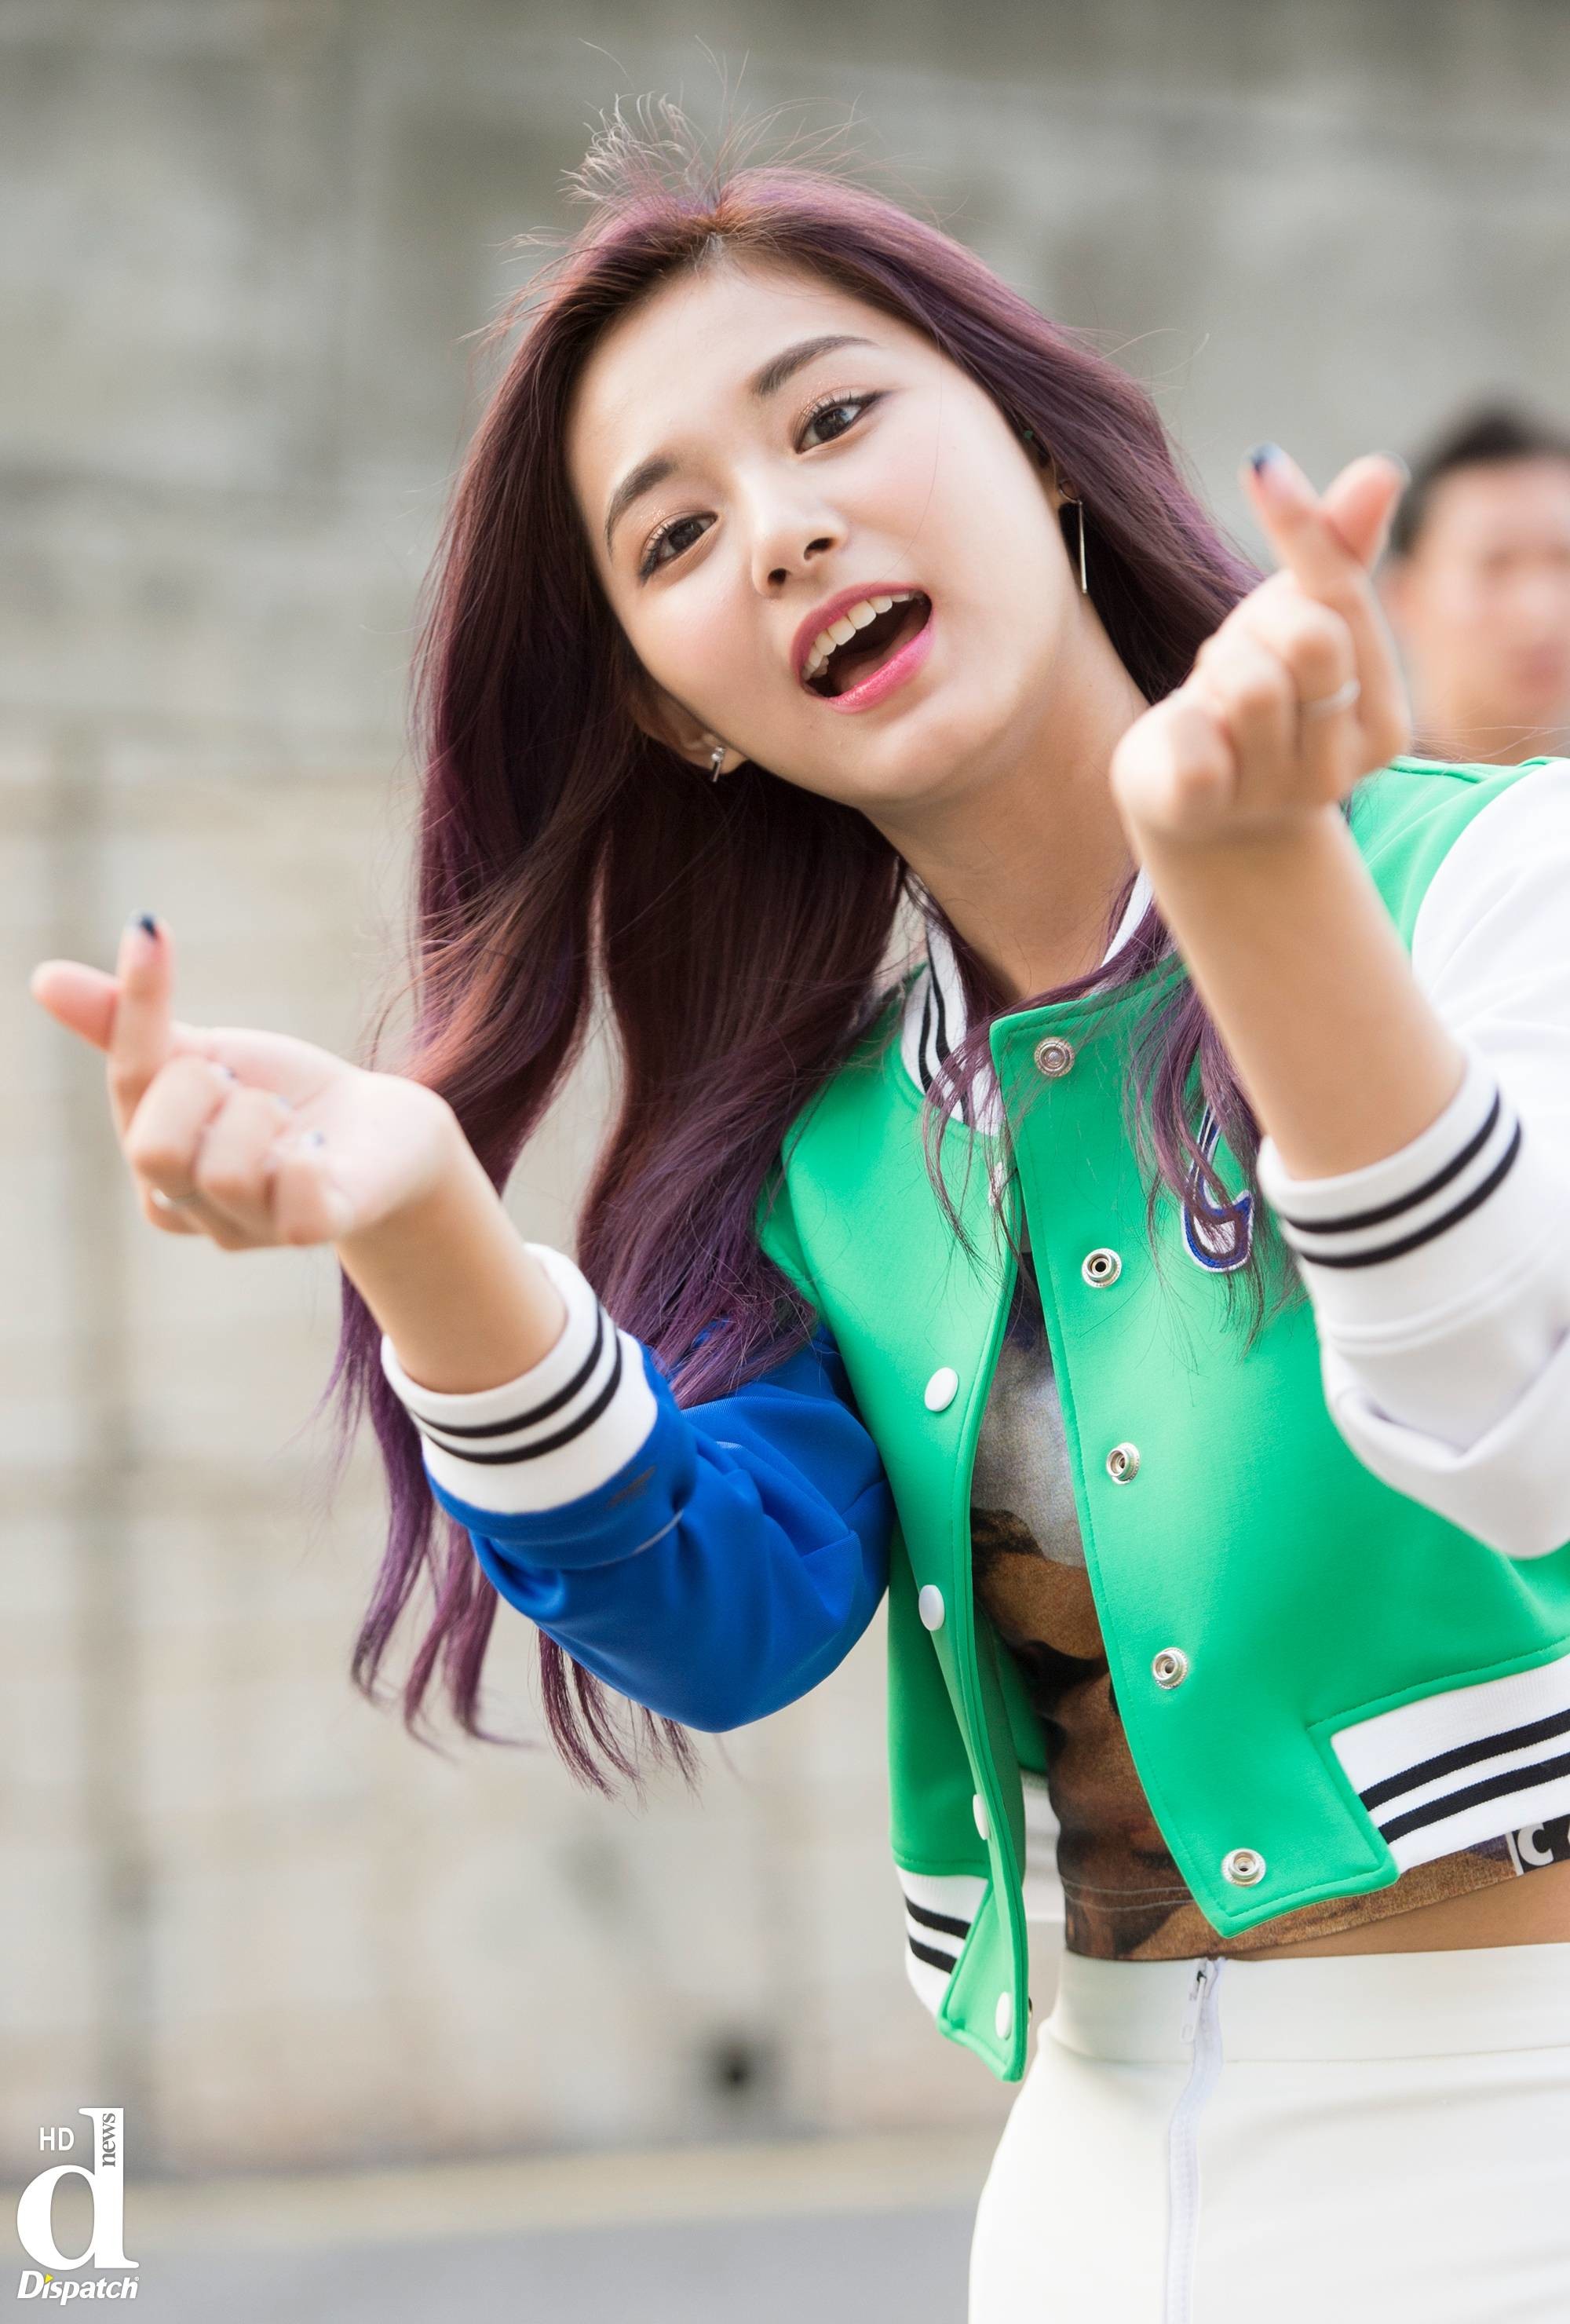 2000x2960 Tags: K-Pop, Twice, Tzuyu, Android/iPhone Wallpaper